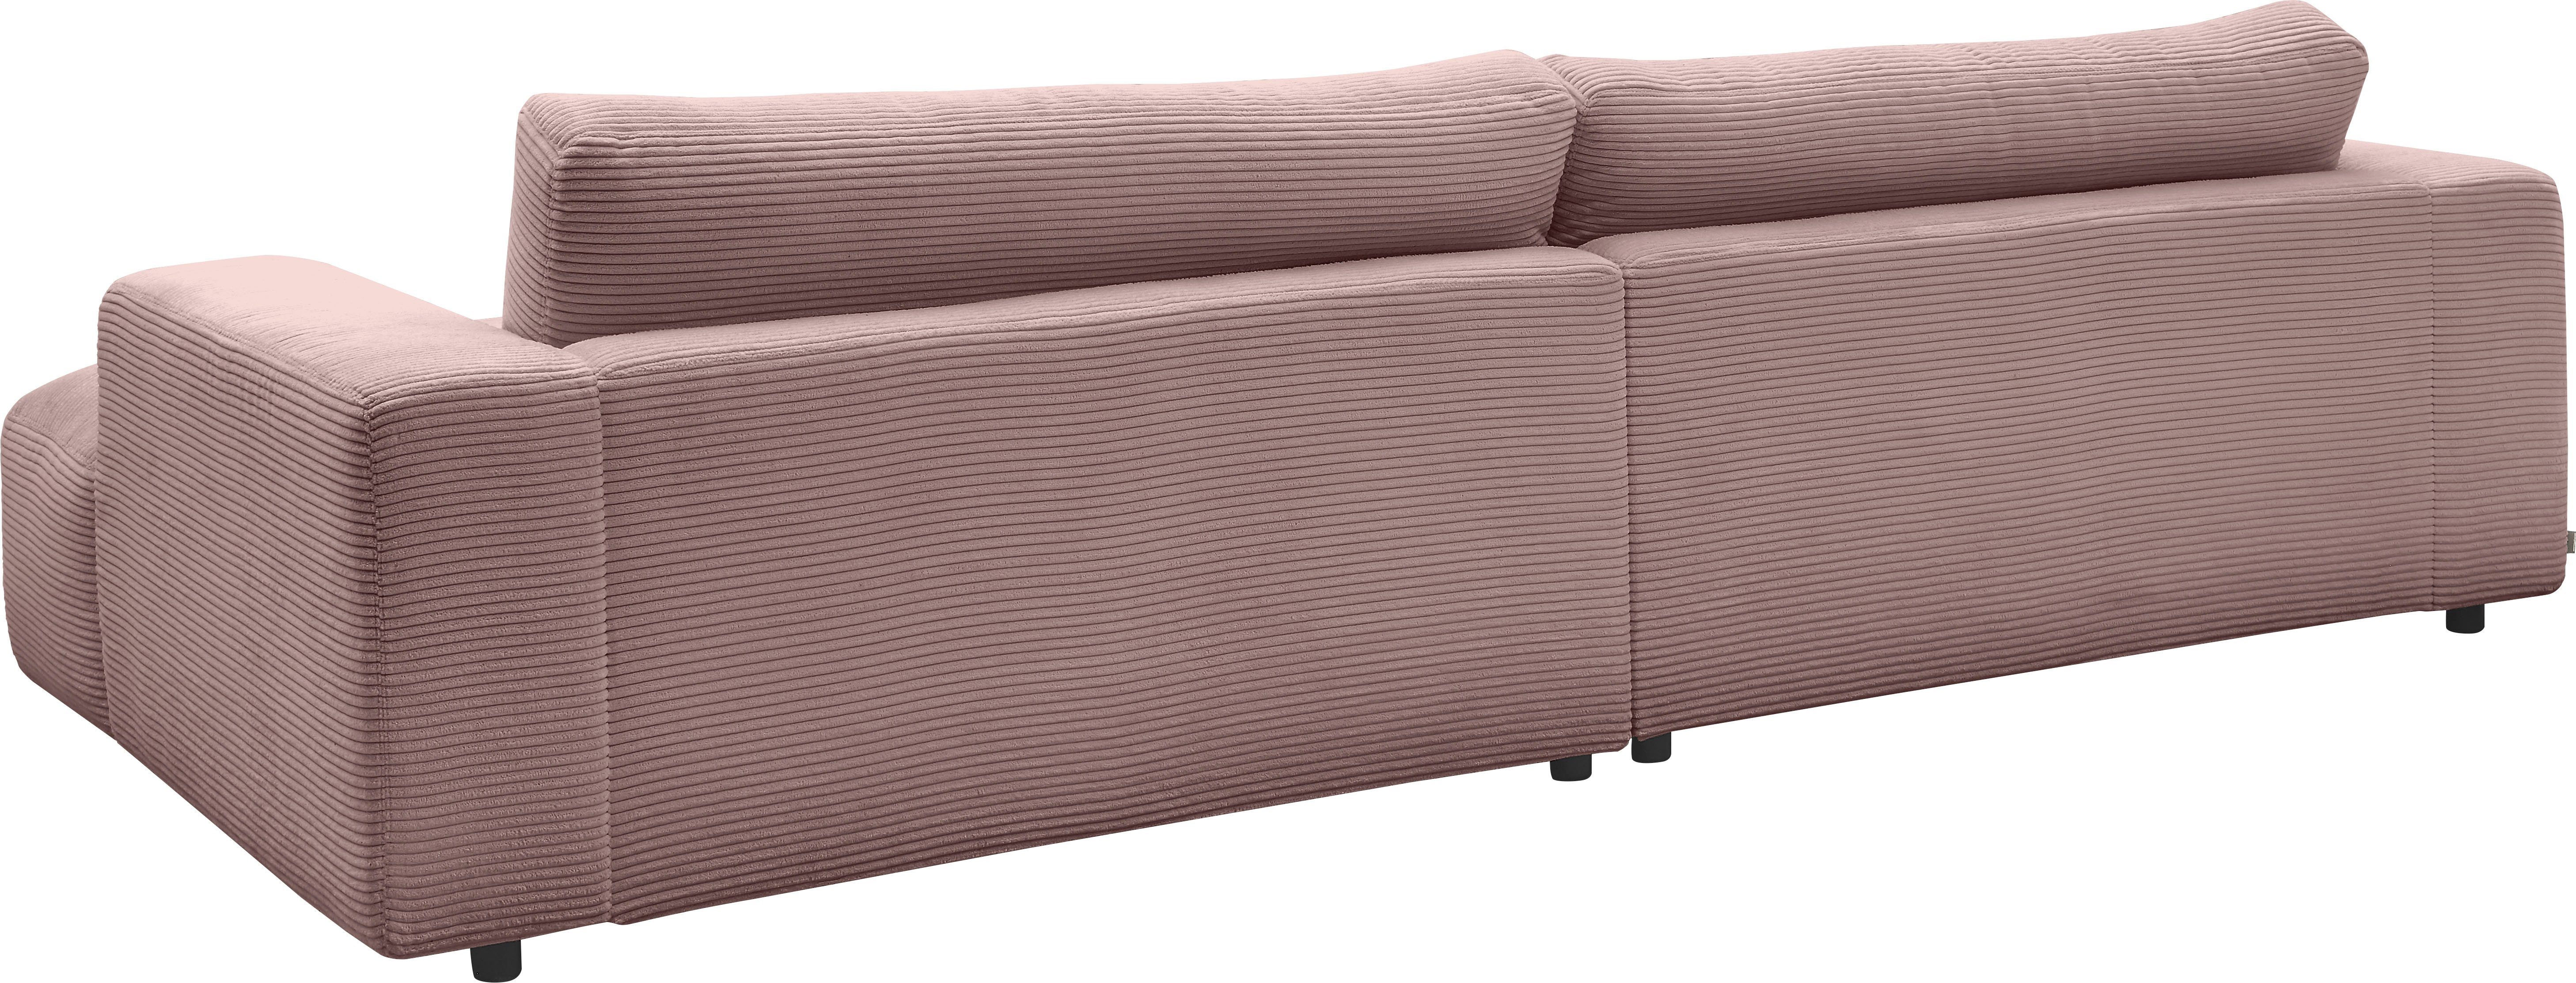 Lucia, GALLERY Cord-Bezug, Musterring 292 rosa by branded M Breite Loungesofa cm